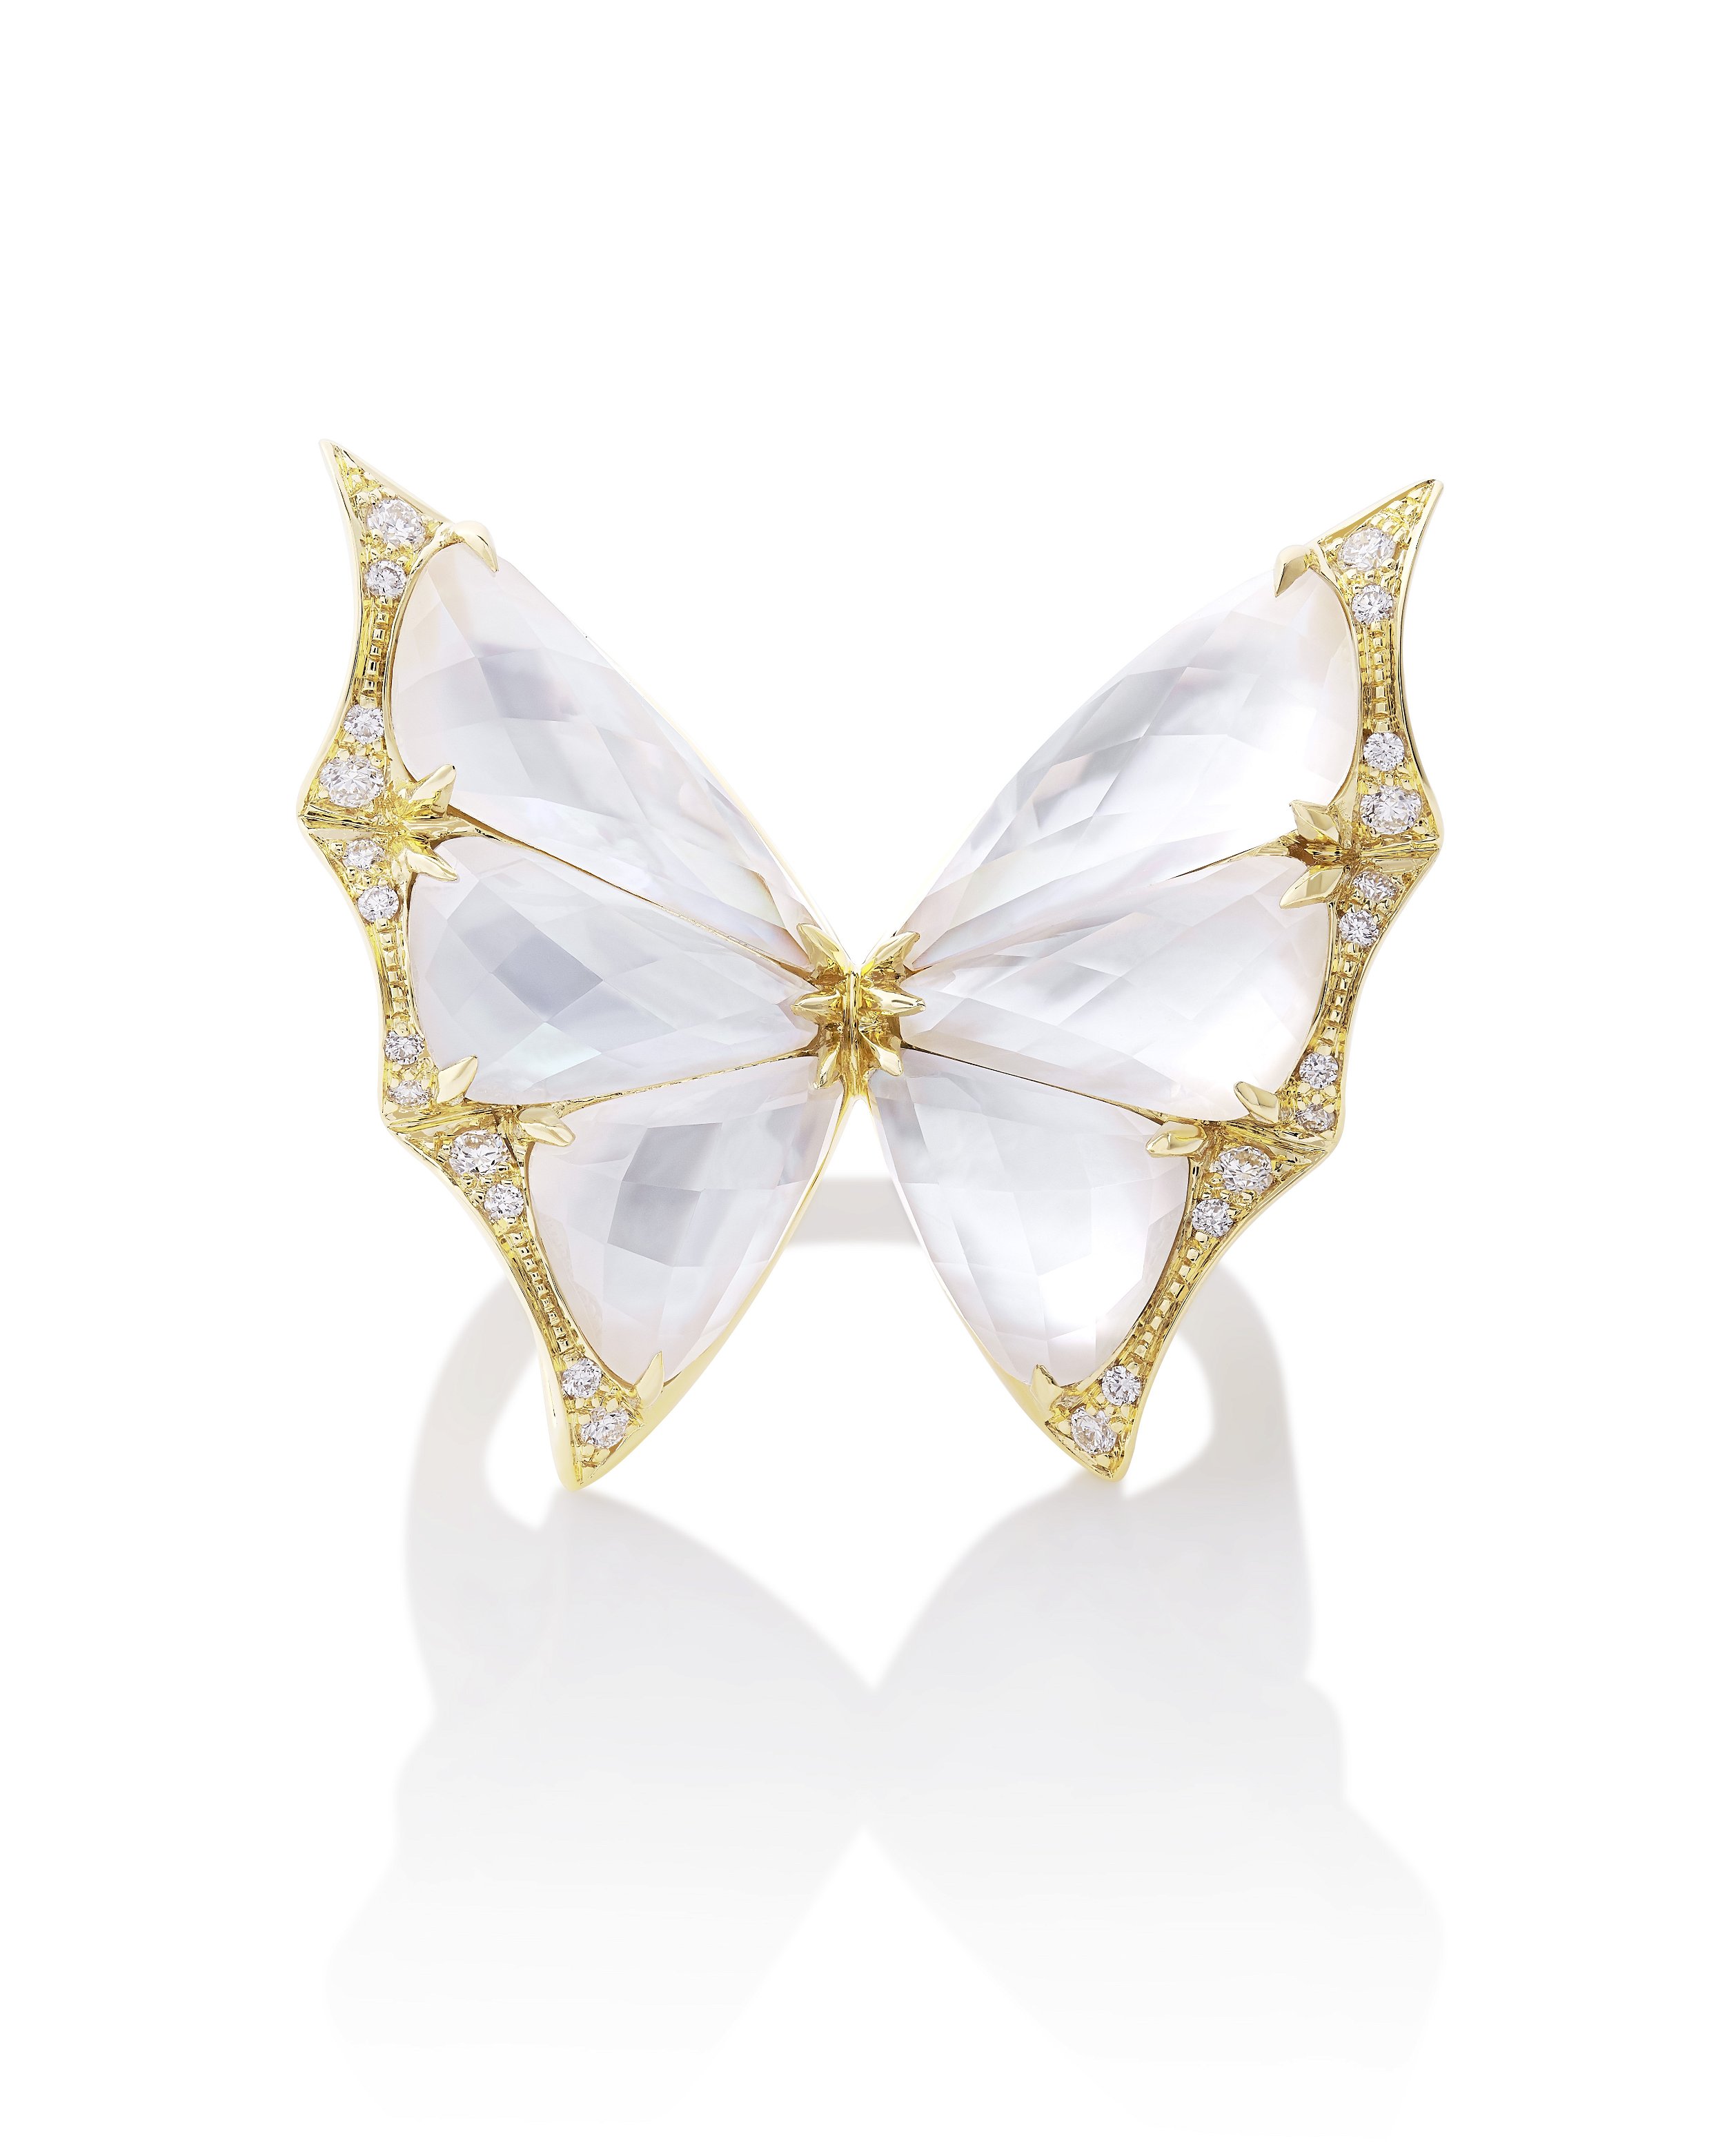 Fly by Night CH2 Large Ring with White Mother of Pearl and White Diamonds in 18kt Yellow Gold - Size 7